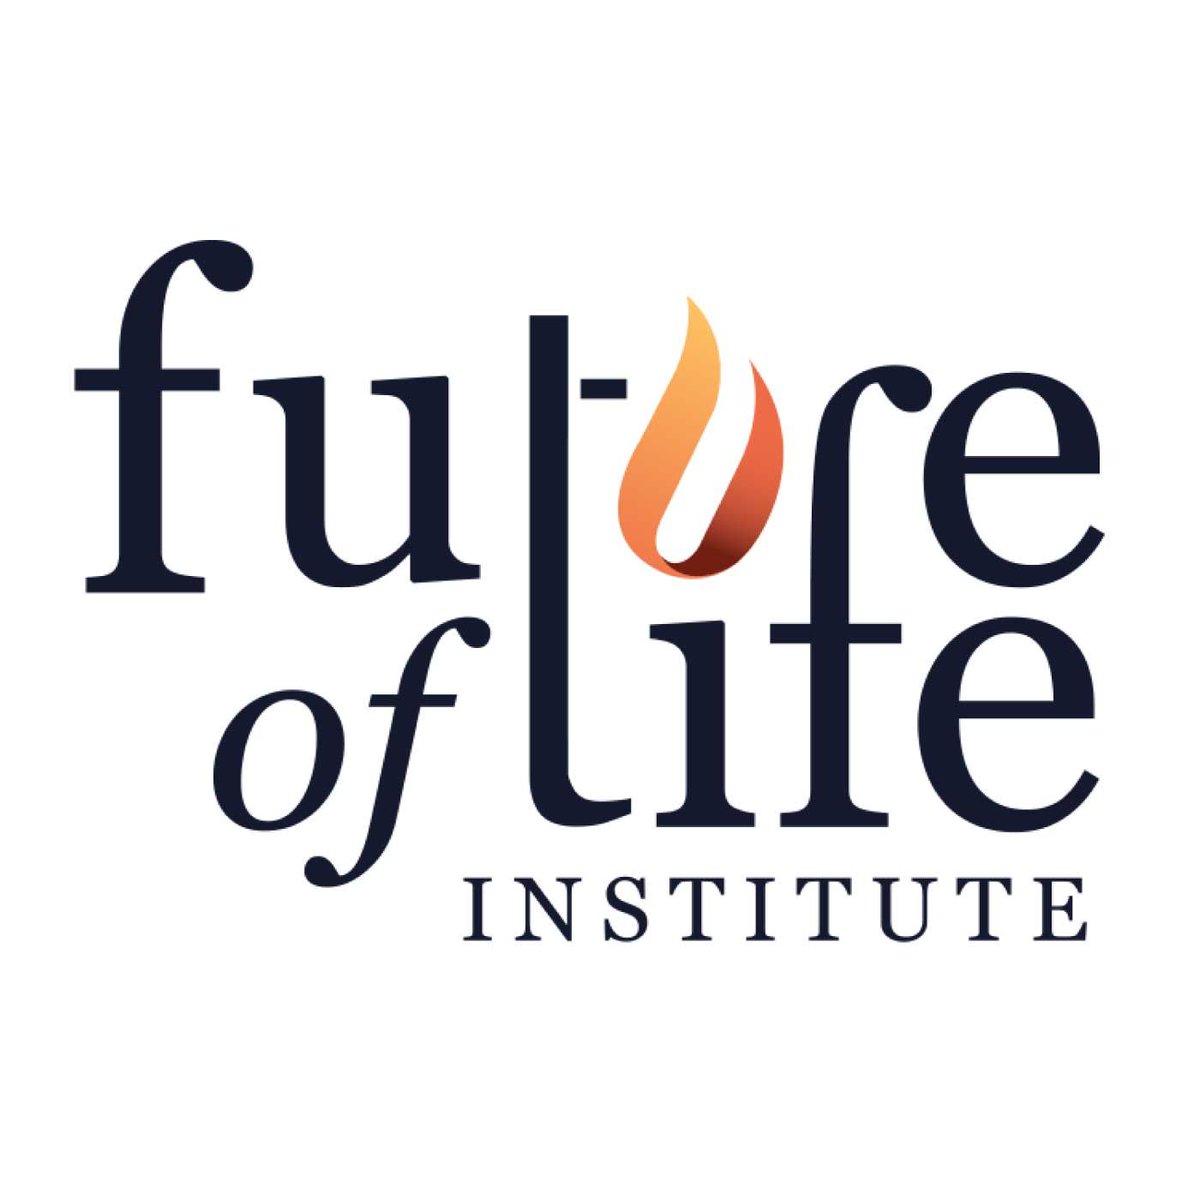 42) In 2015, Elon Musk donated $10 million to The Future of Life Institute “to run a global research program aimed at keeping AI beneficial to humanity.”  https://futureoflife.org/2015/10/12/elon-musk-donates-10m-to-keep-ai-beneficial/?cn-reloaded=1